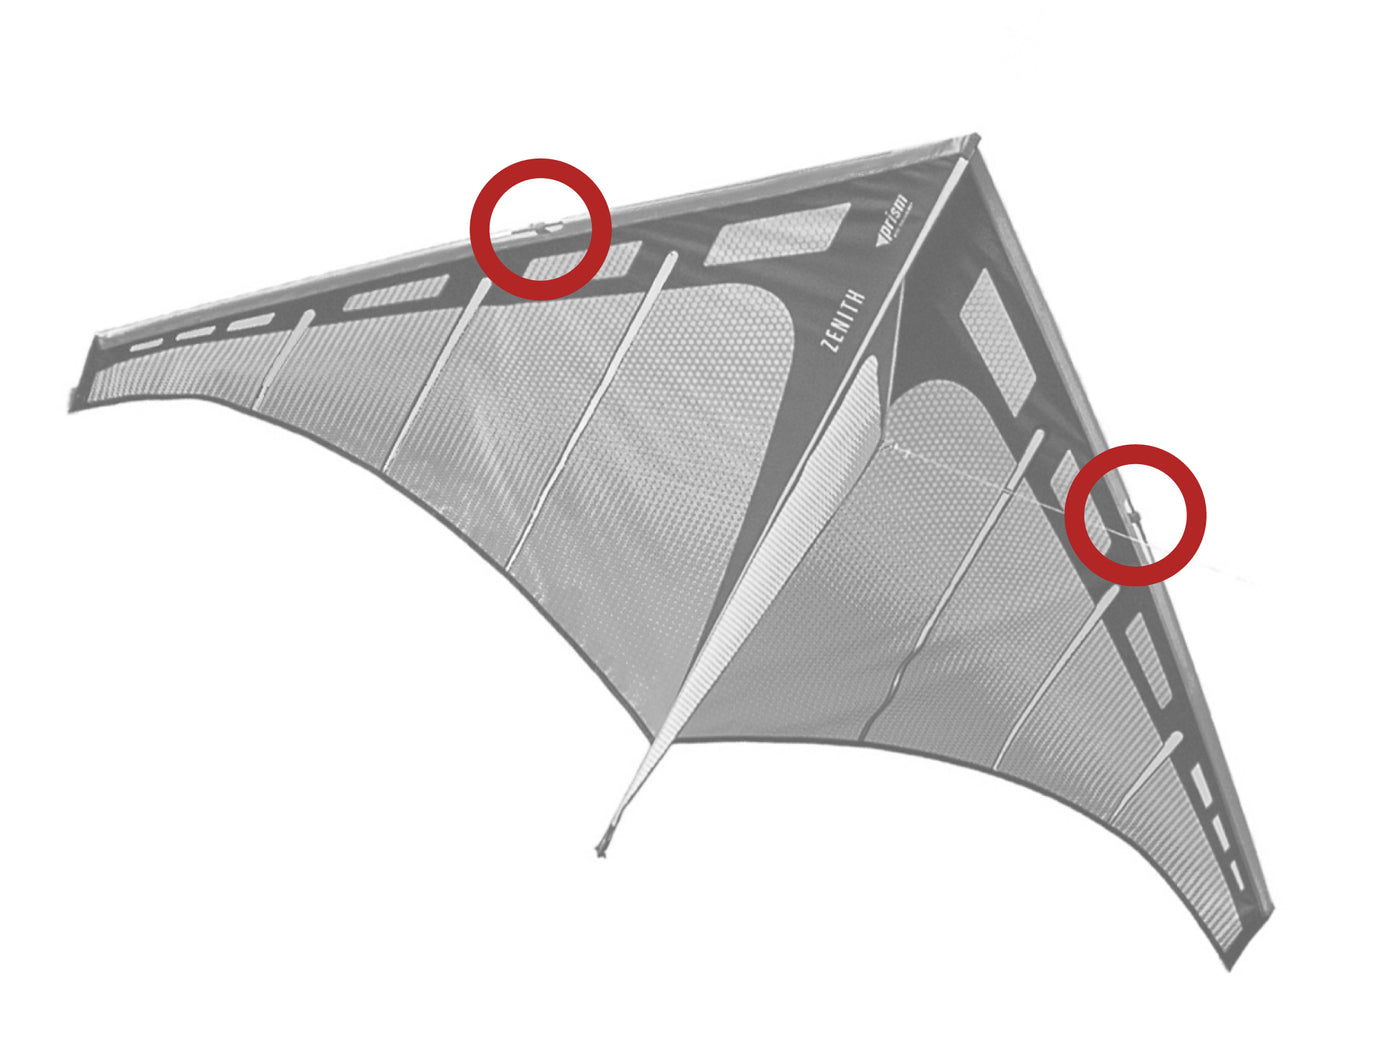 Diagram showing location of the Zenith 5 / Stowaway Delta Leading Edge Fittings on the kite.